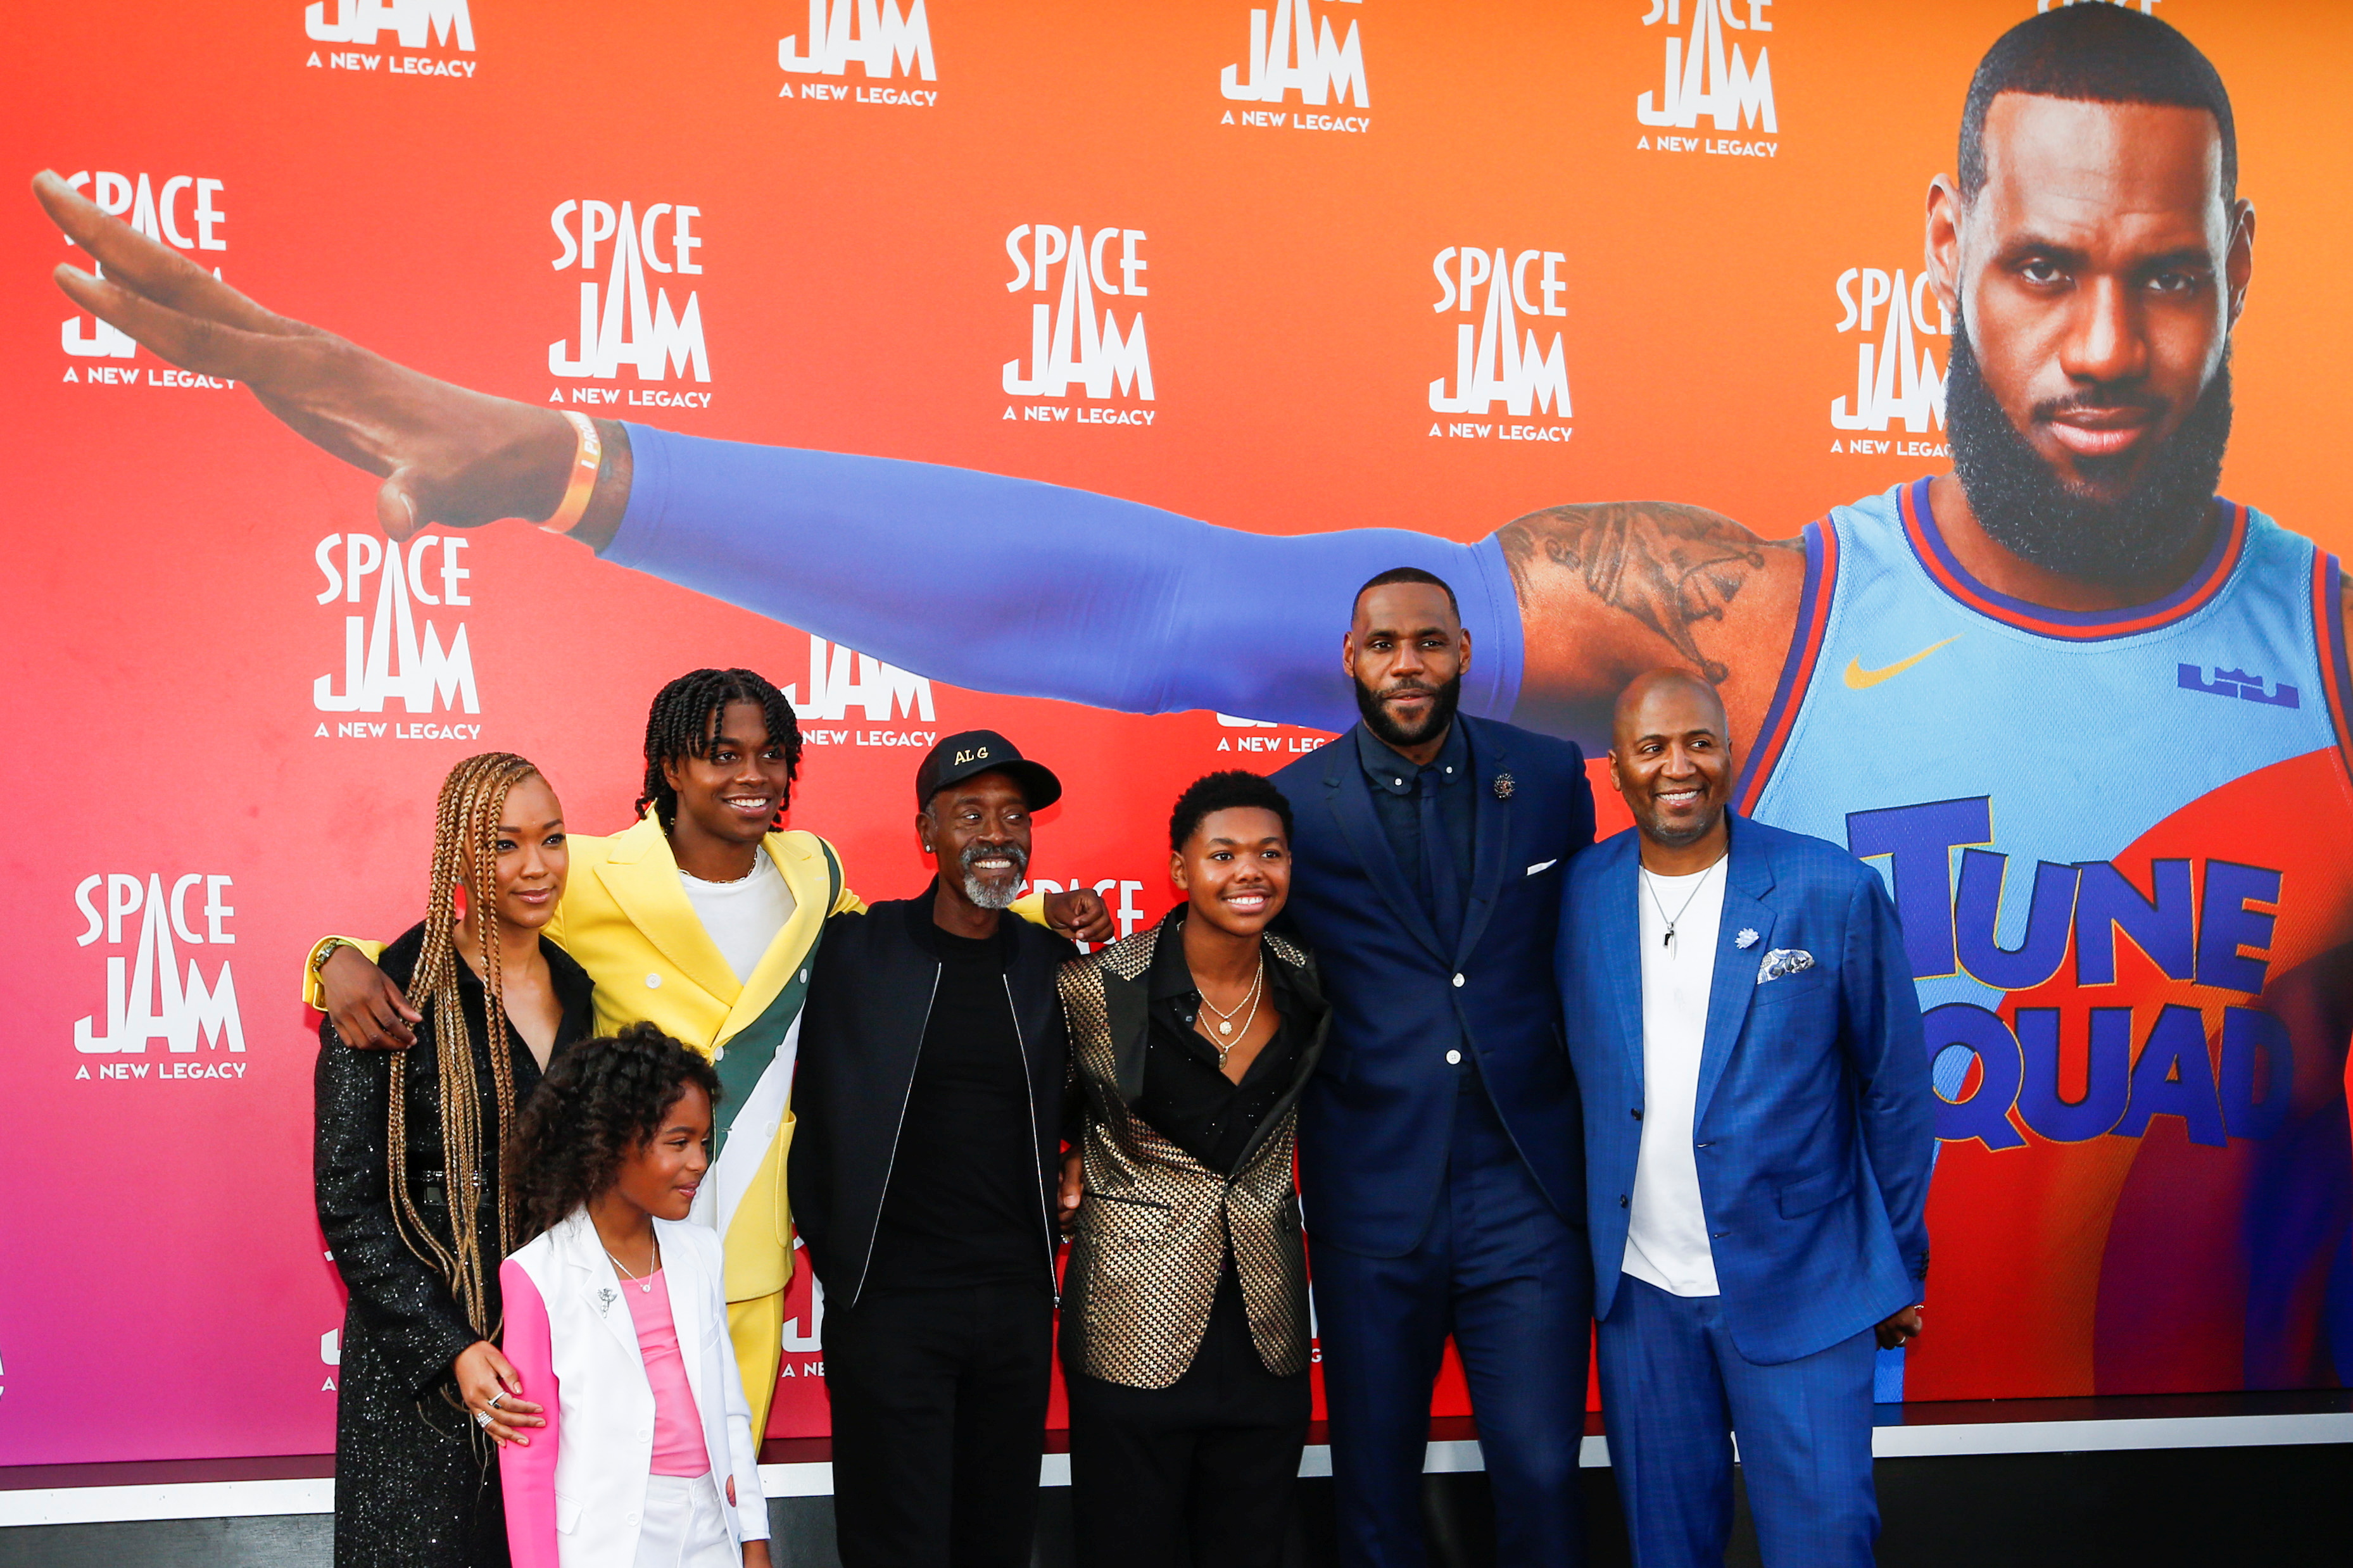 Space Jam Cast List: Actors and Actresses from Space Jam